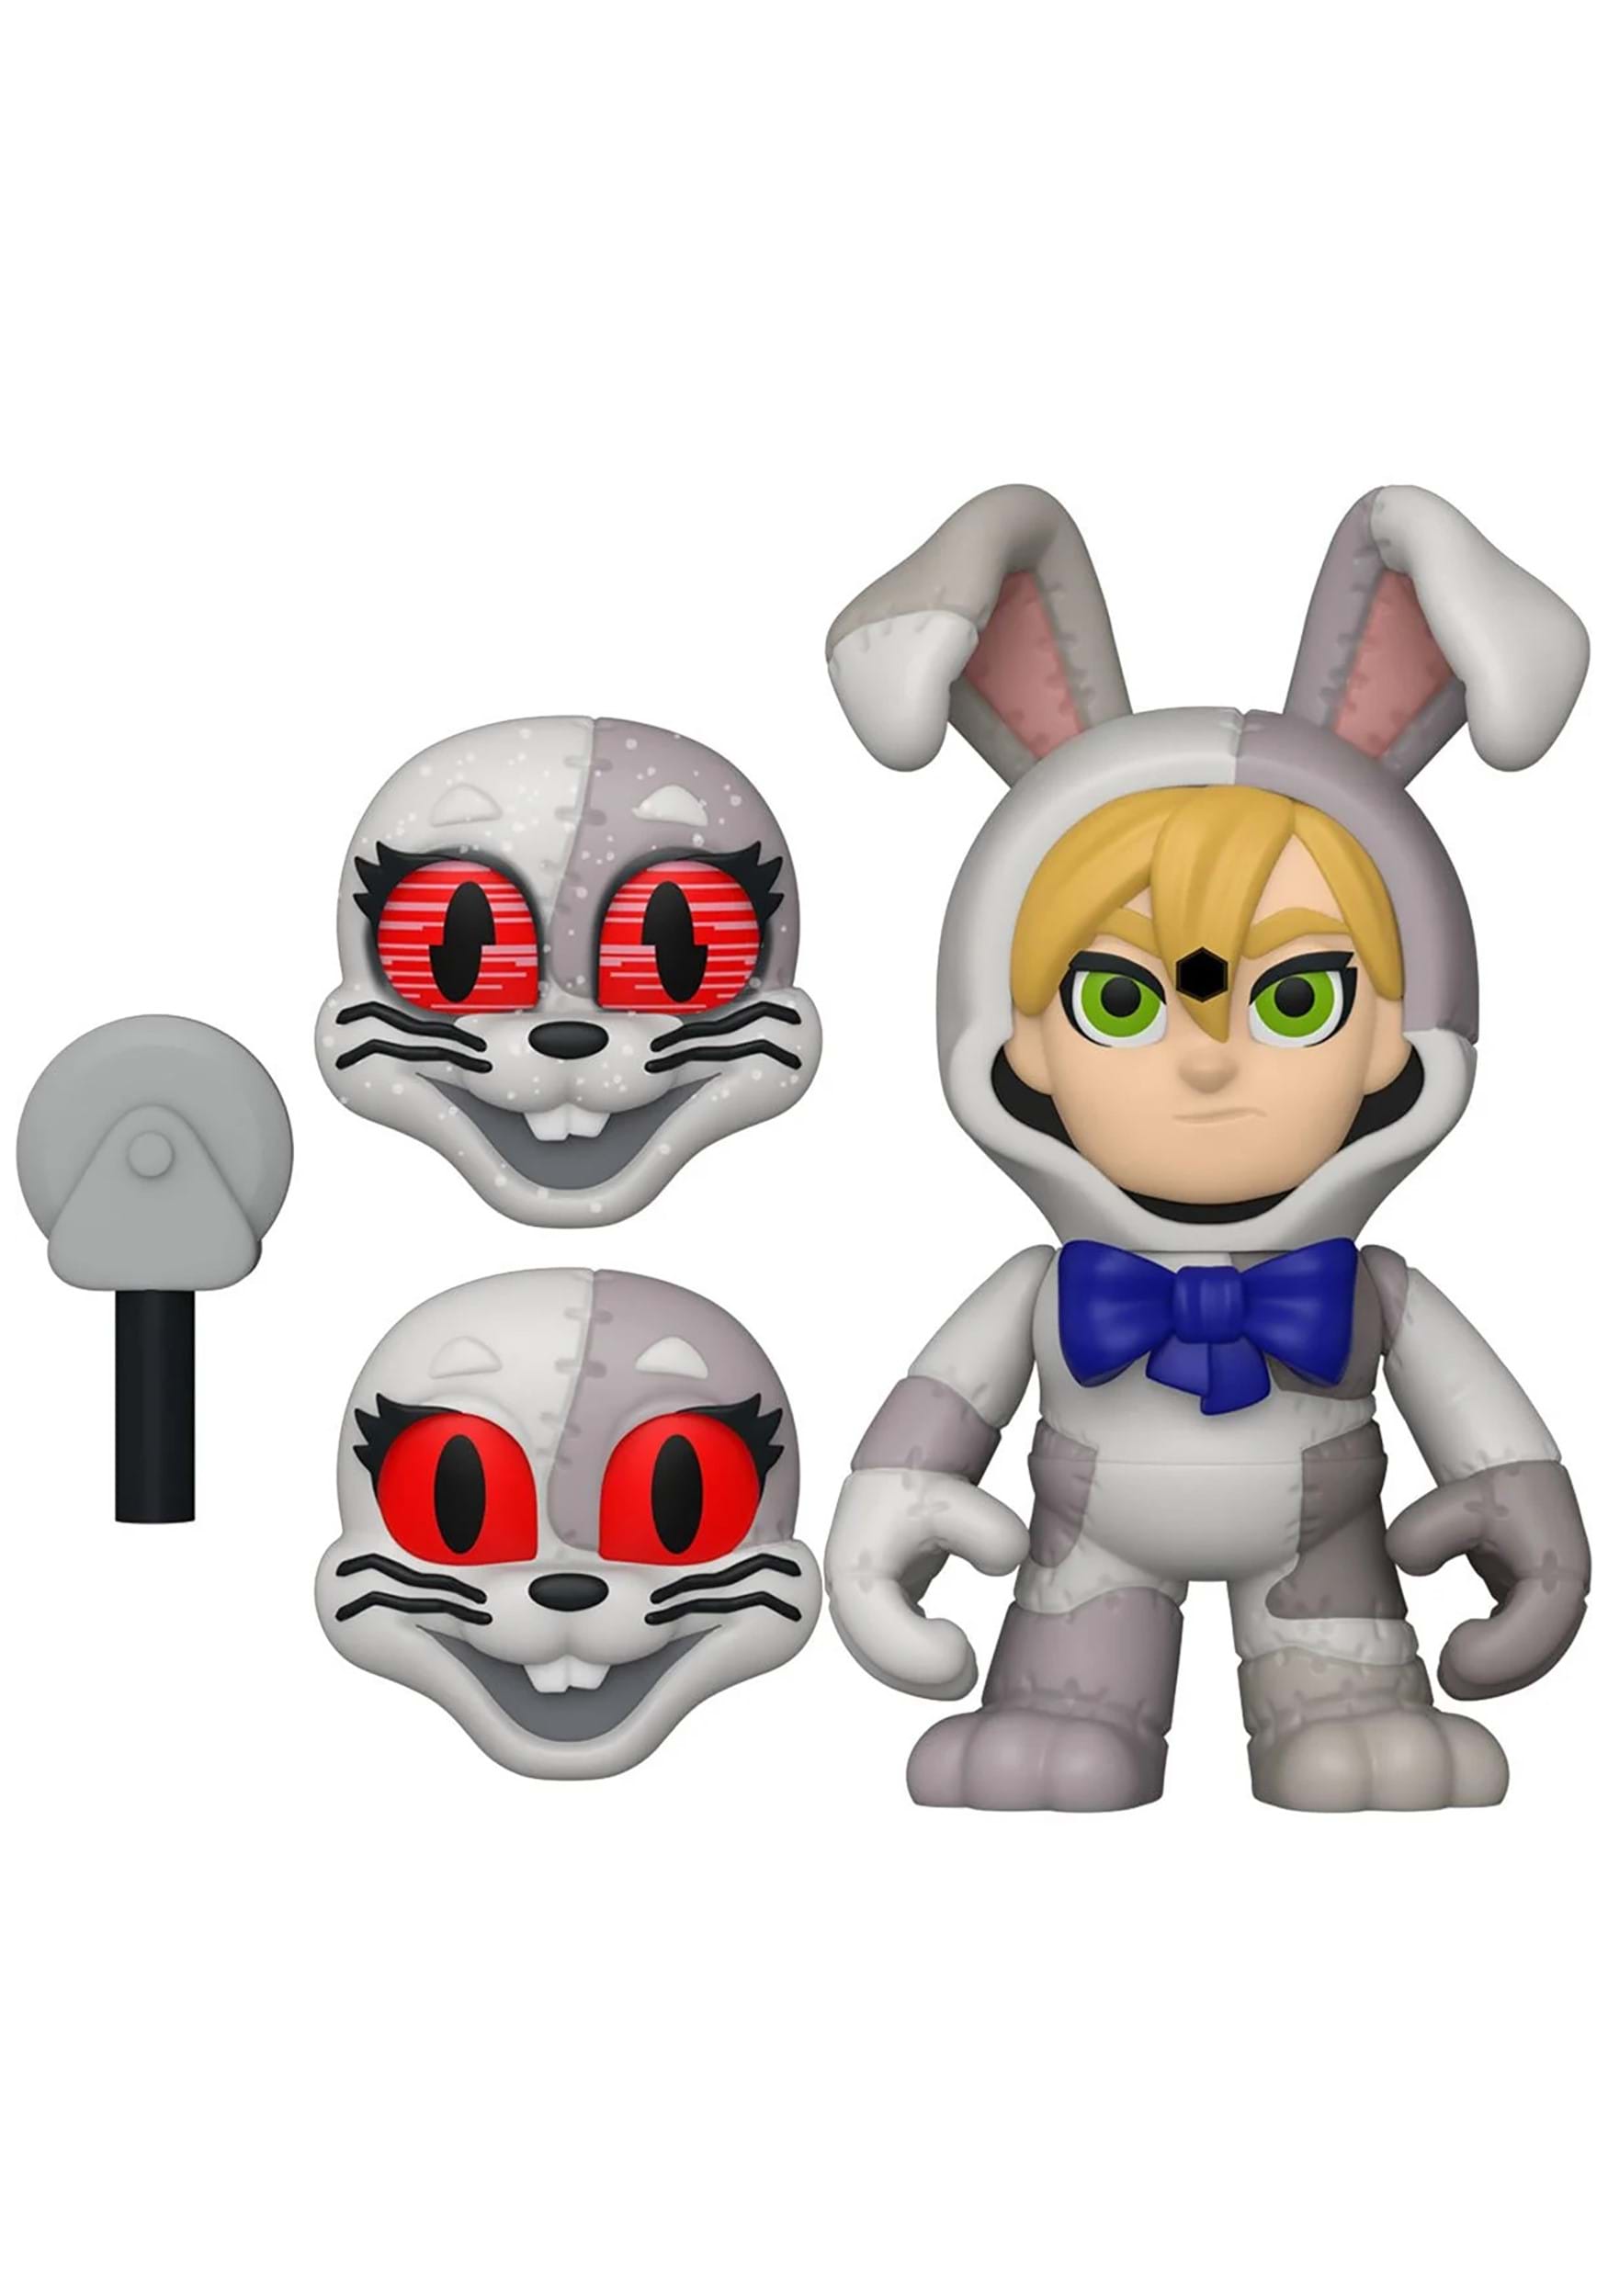 Action Figure Foxy Snaps! - Five Nights at Freddy's - Funko